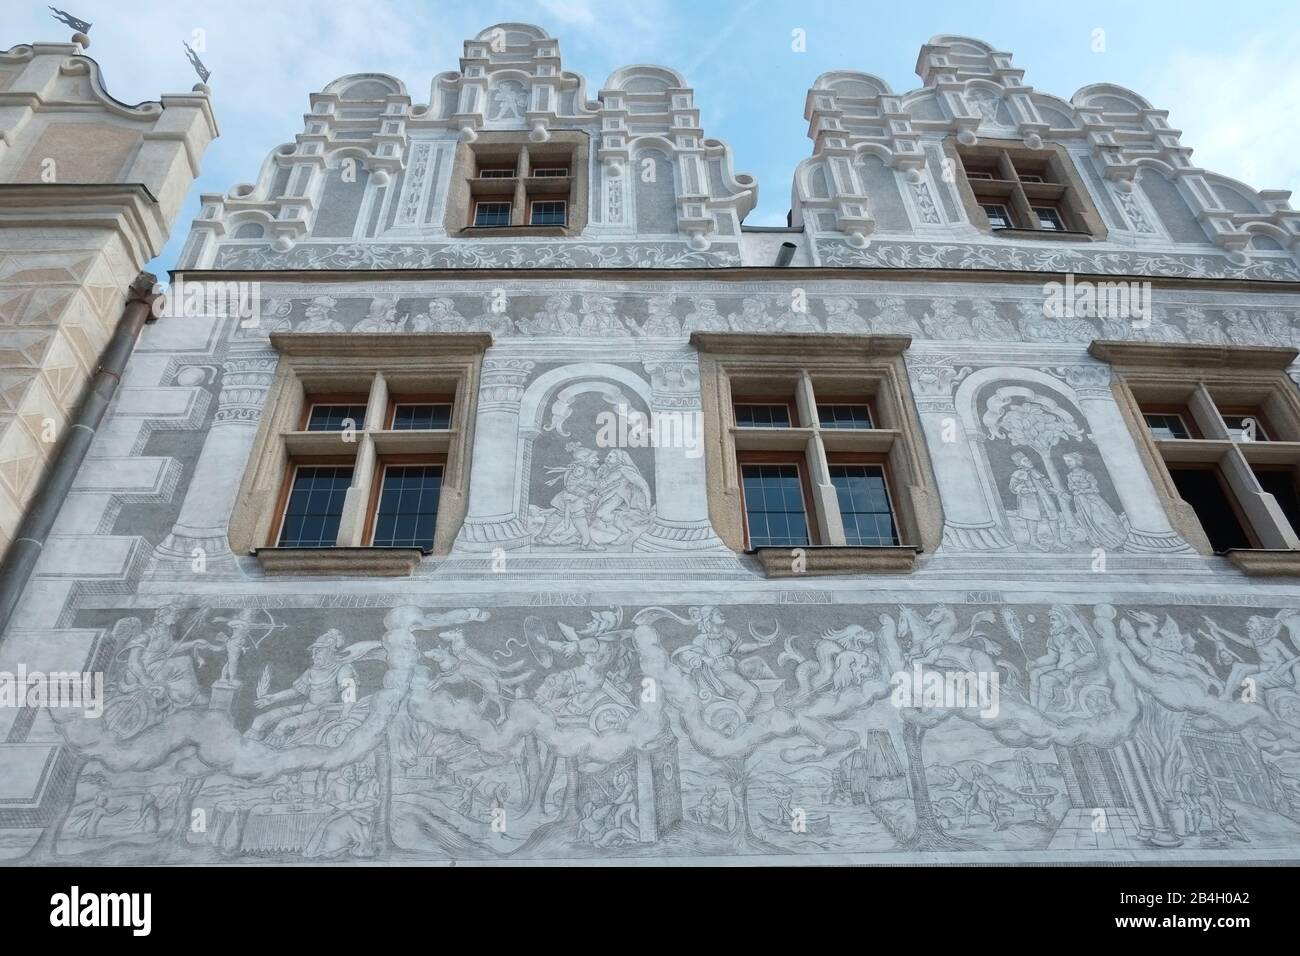 Slavonice, Czech Republic. Buildings decorated by sgraffito, a form of decoration made by scratching through a surface to reveal a lower layer of a contrasting color, typically done in plaster or stucco on walls and facades Stock Photo